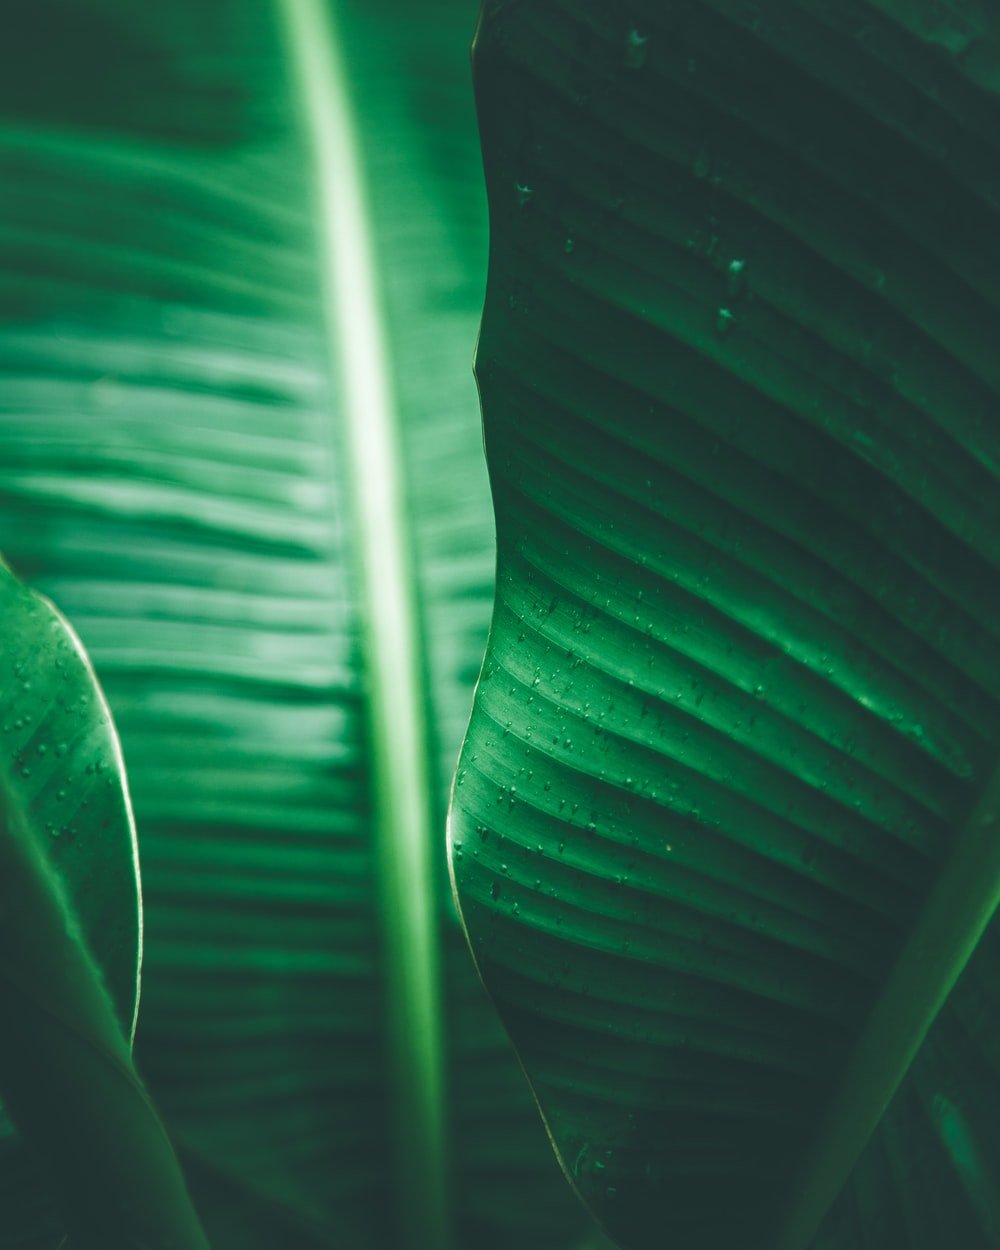 Jungle Leaf Picture. Download Free Image